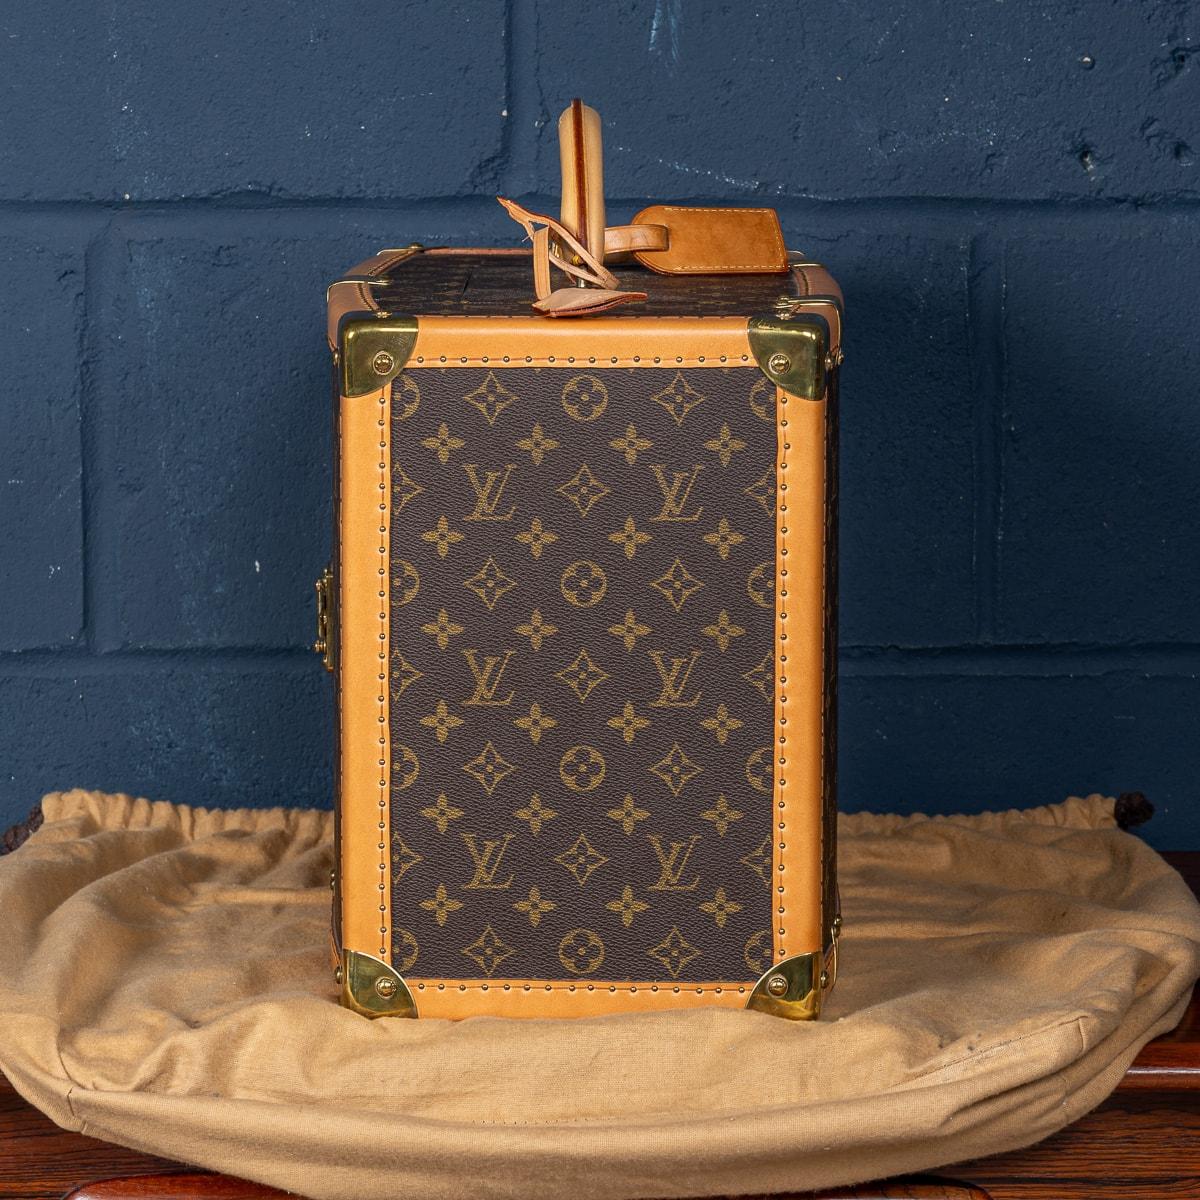 For collectors and aficionados of fashion and rare trunks, the Louis Vuitton Limited Edition Monogram Canvas “amfAR Sharon Stone Trunk” stands as a truly exceptional piece. This rare trunk, designed by the renowned actress Sharon Stone marries high